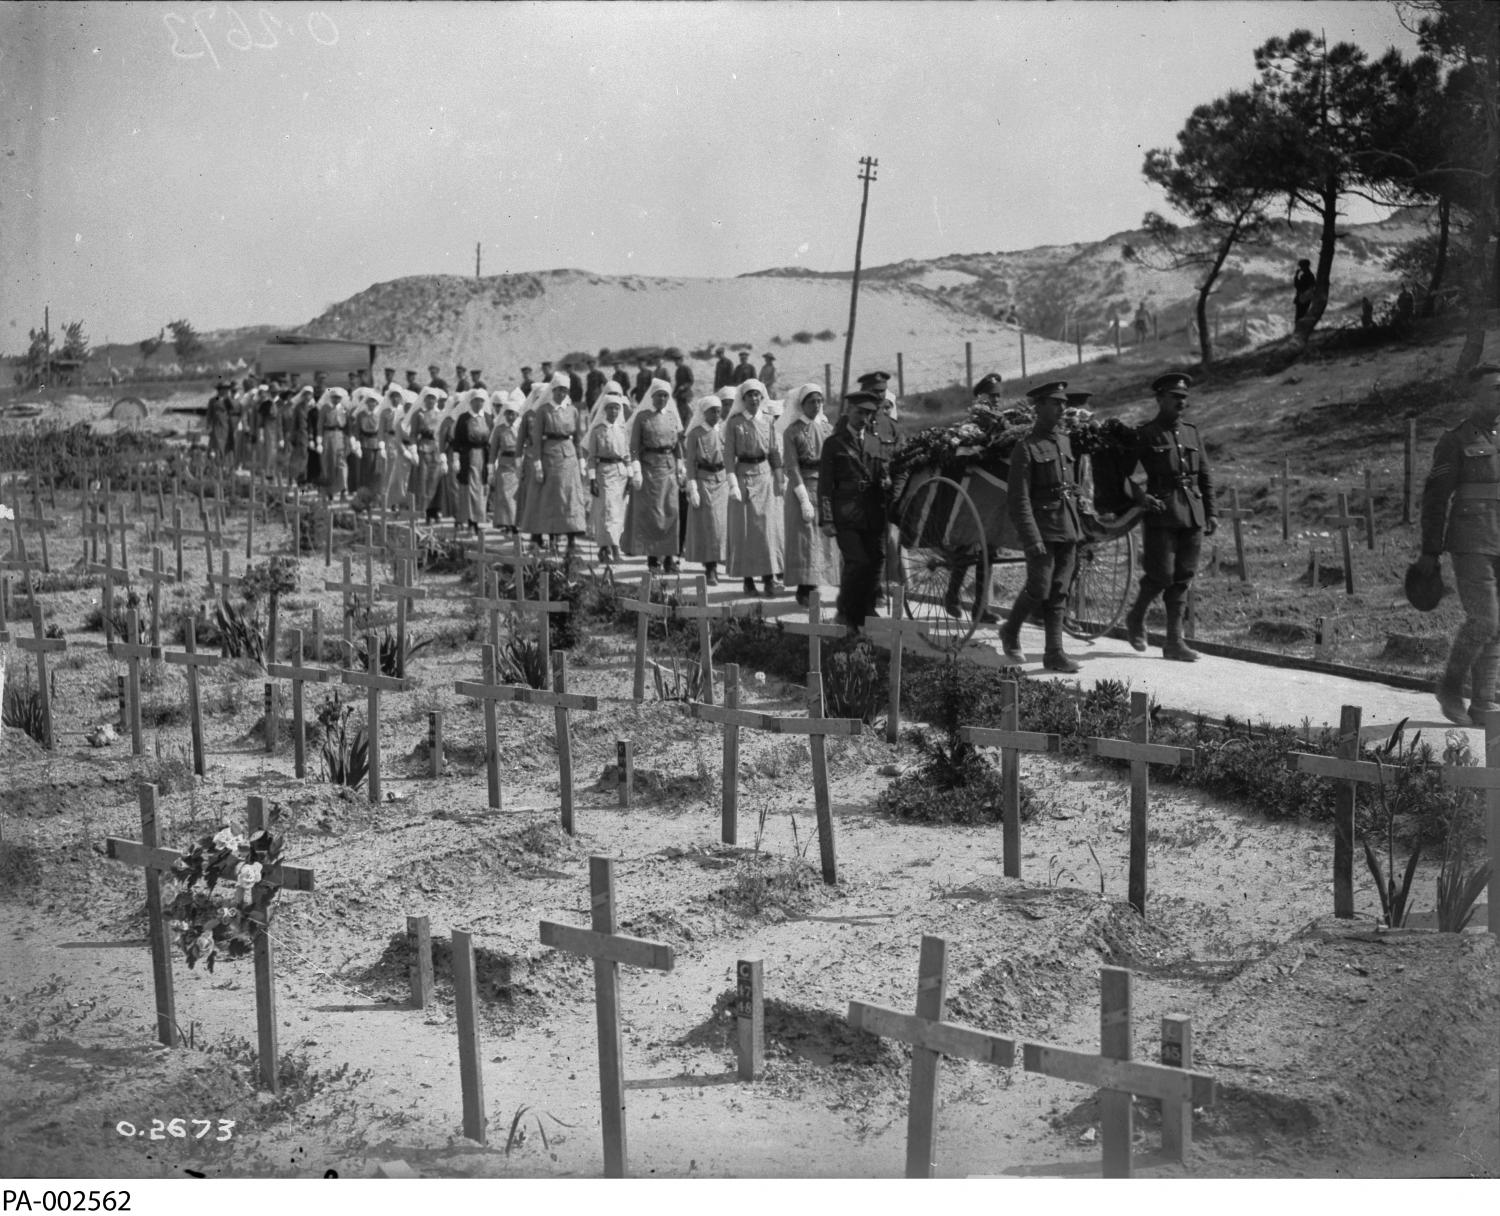 Funeral of Nursing Sister G.M.M. Wake, who died of wounds received in a German air raid Nursing Sister Wake was a graduate of Royal Jubilee Hospital School of Nursing, Victoria, British Columbia, Class of 1912